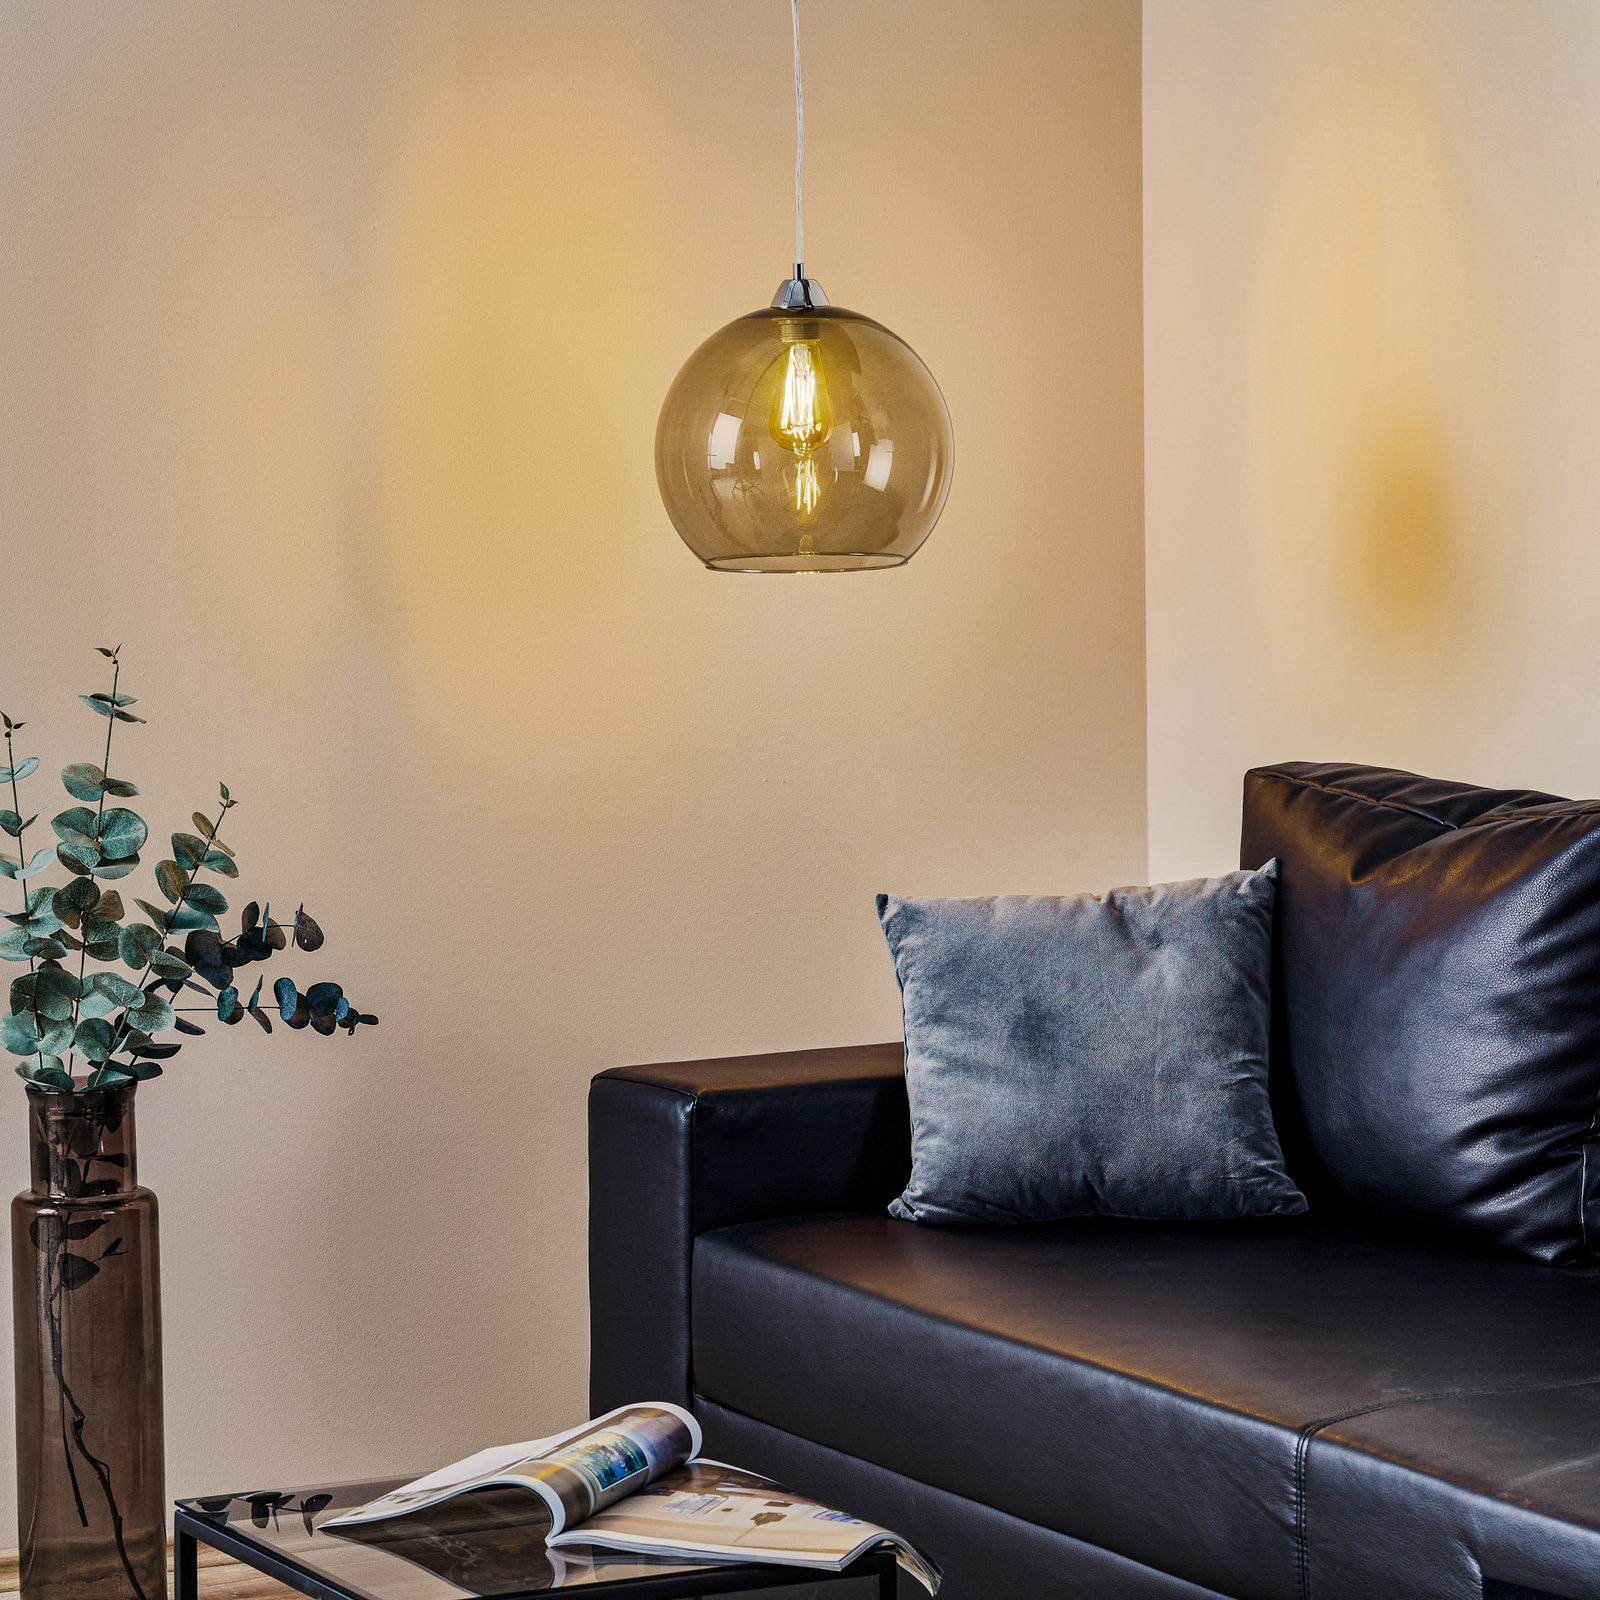 Colour hanging light, grey glass lampshade